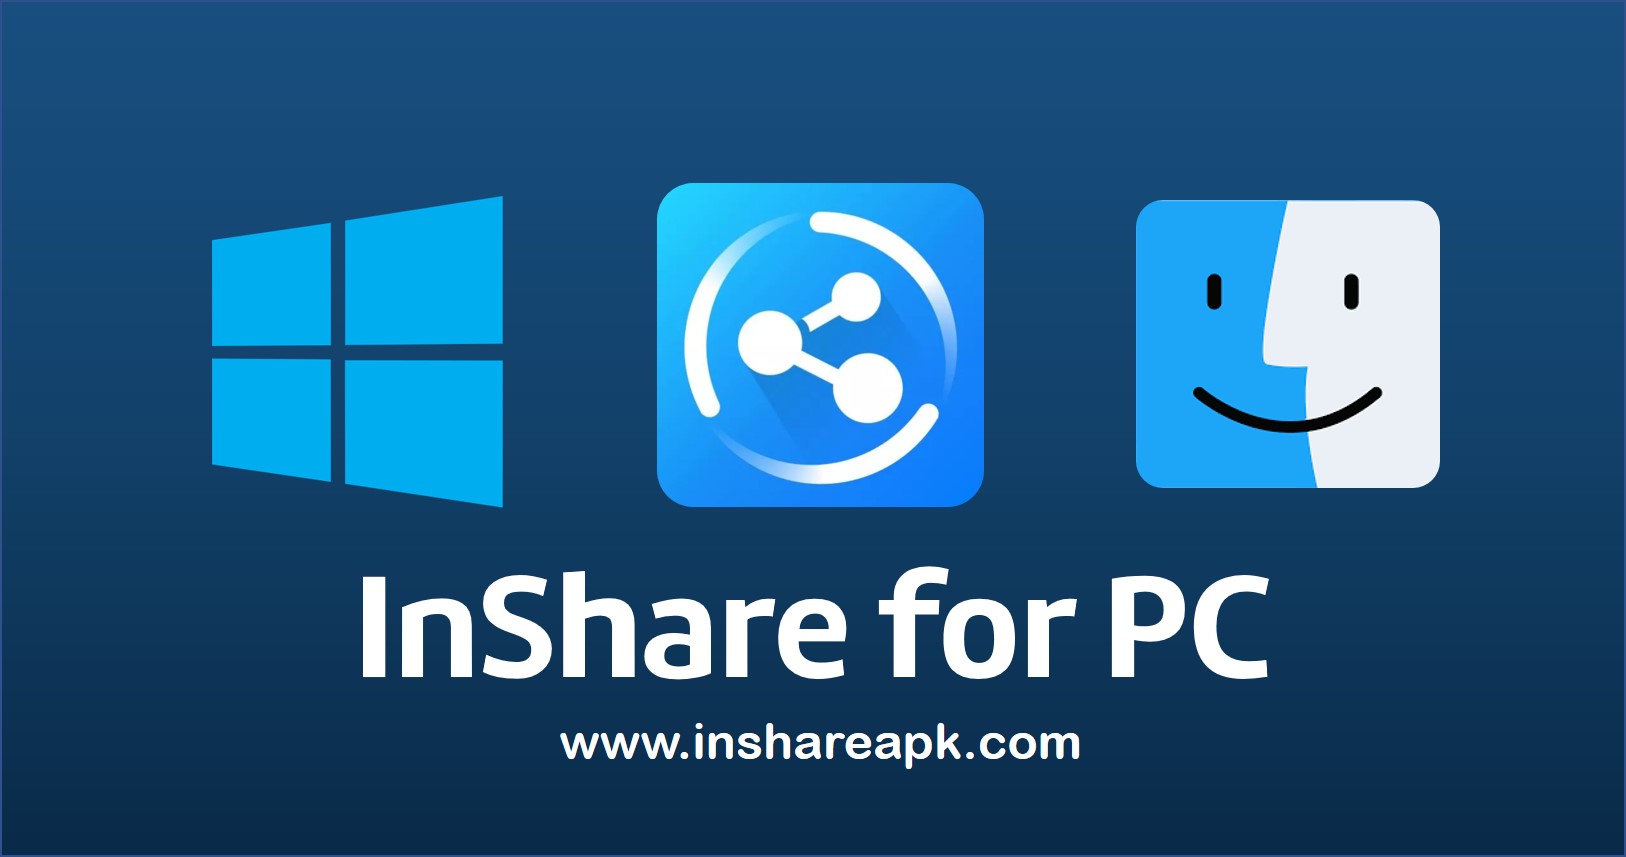 inshare for pc